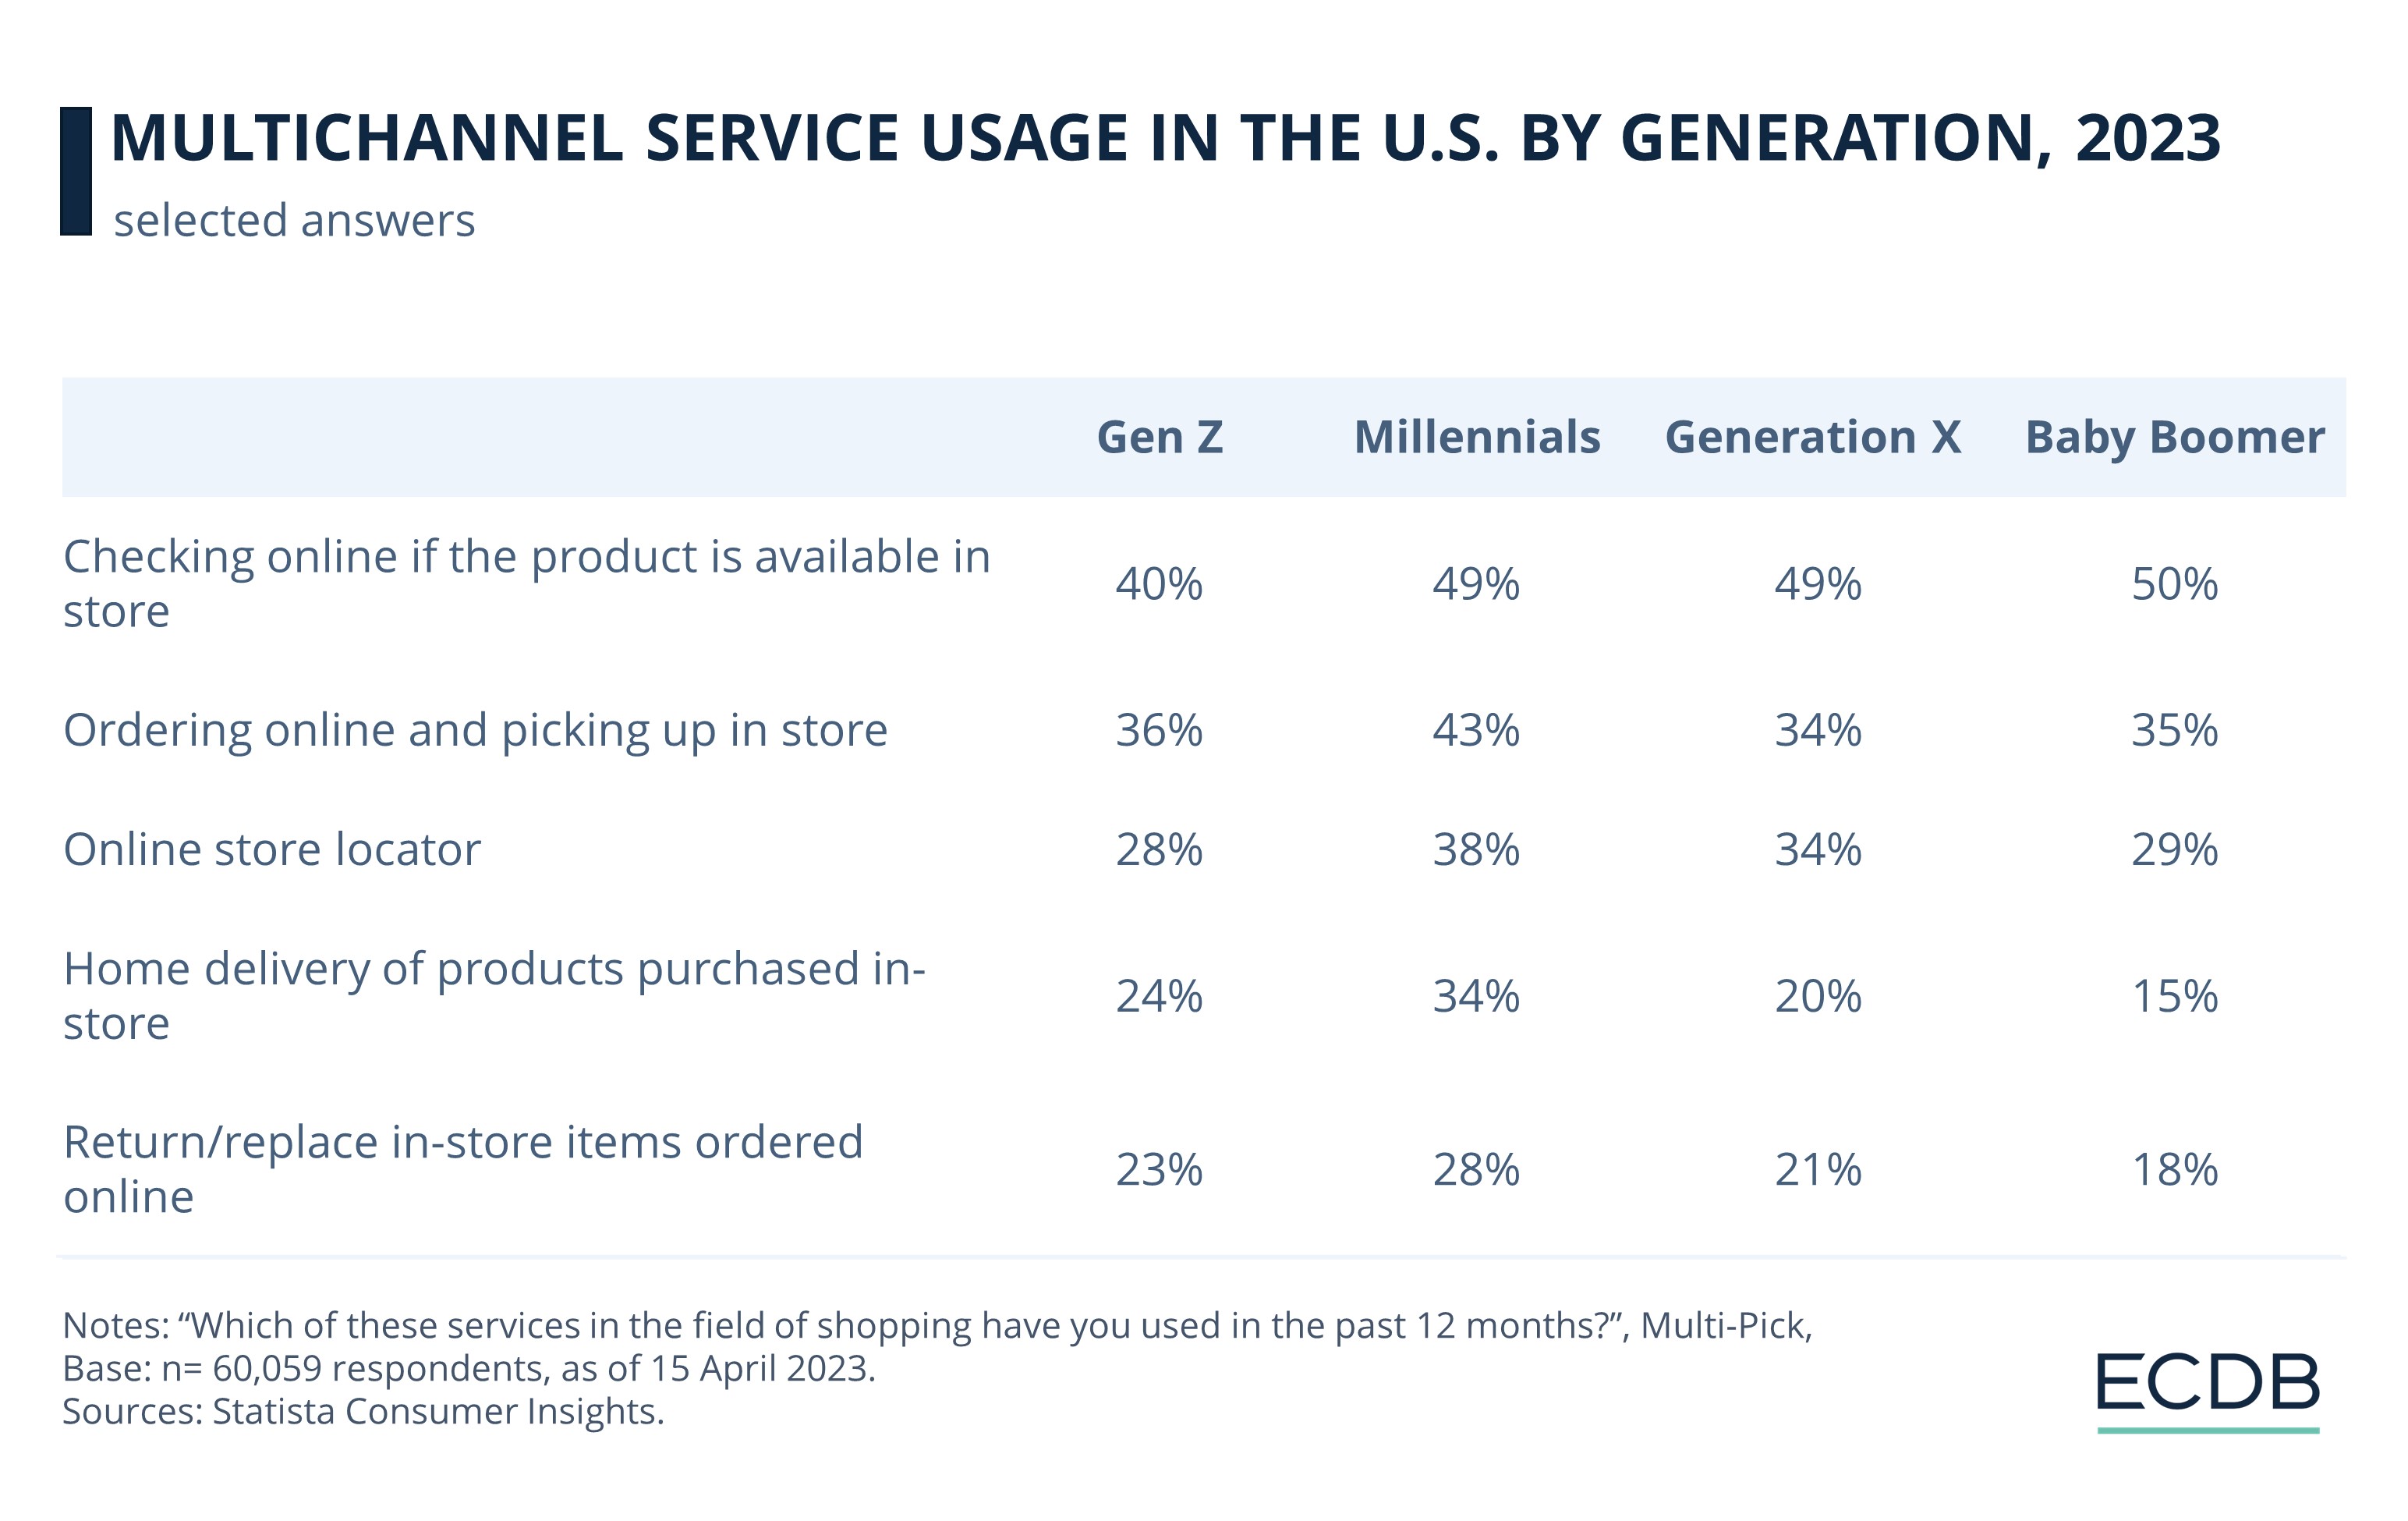 Multichannel Service Usage in The U.S. By Generation, 2023